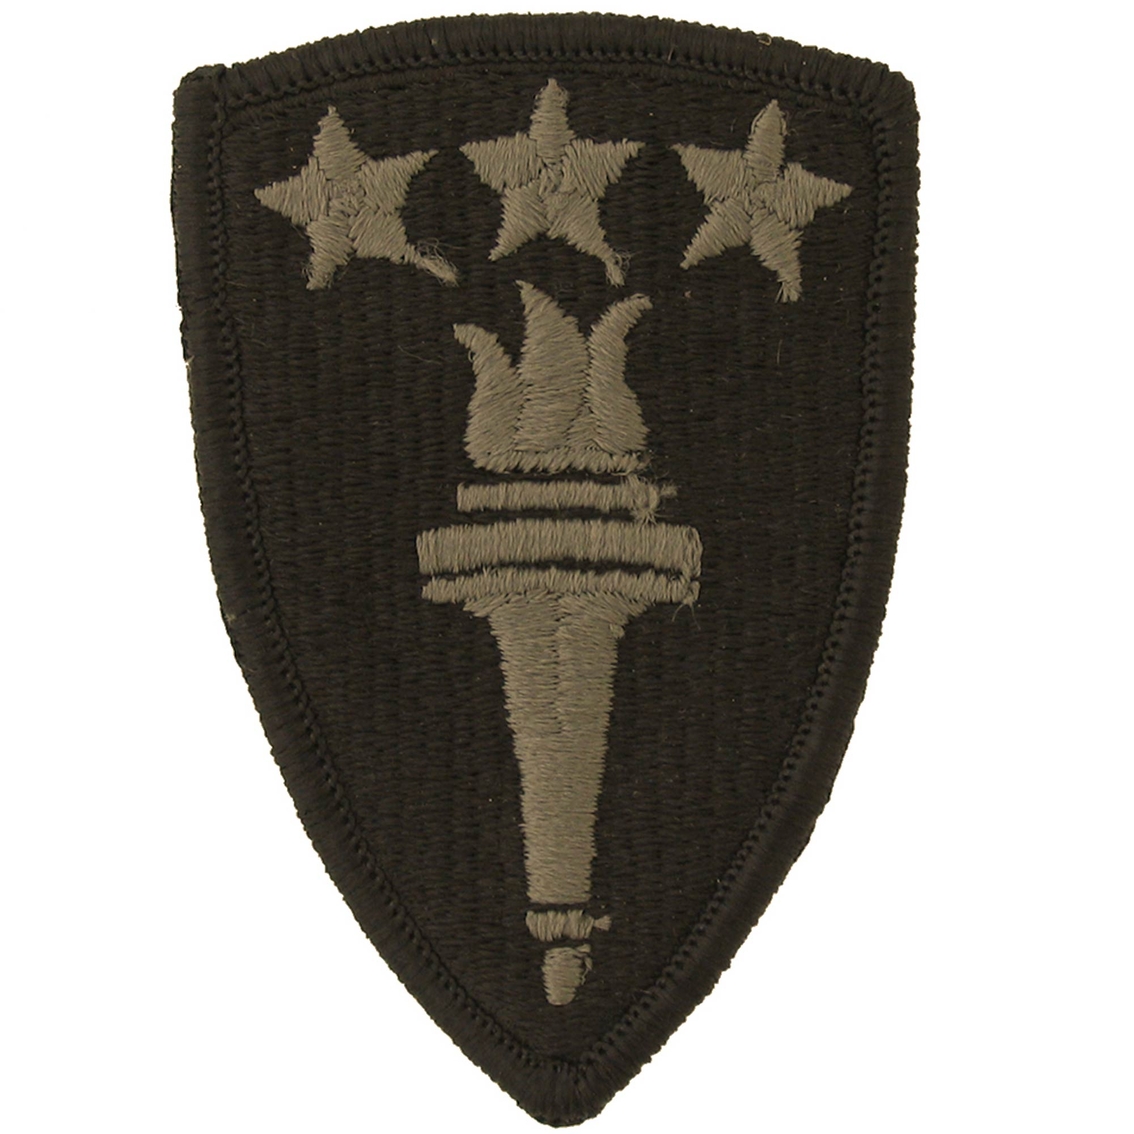 Army War College 2.75 Military Patch